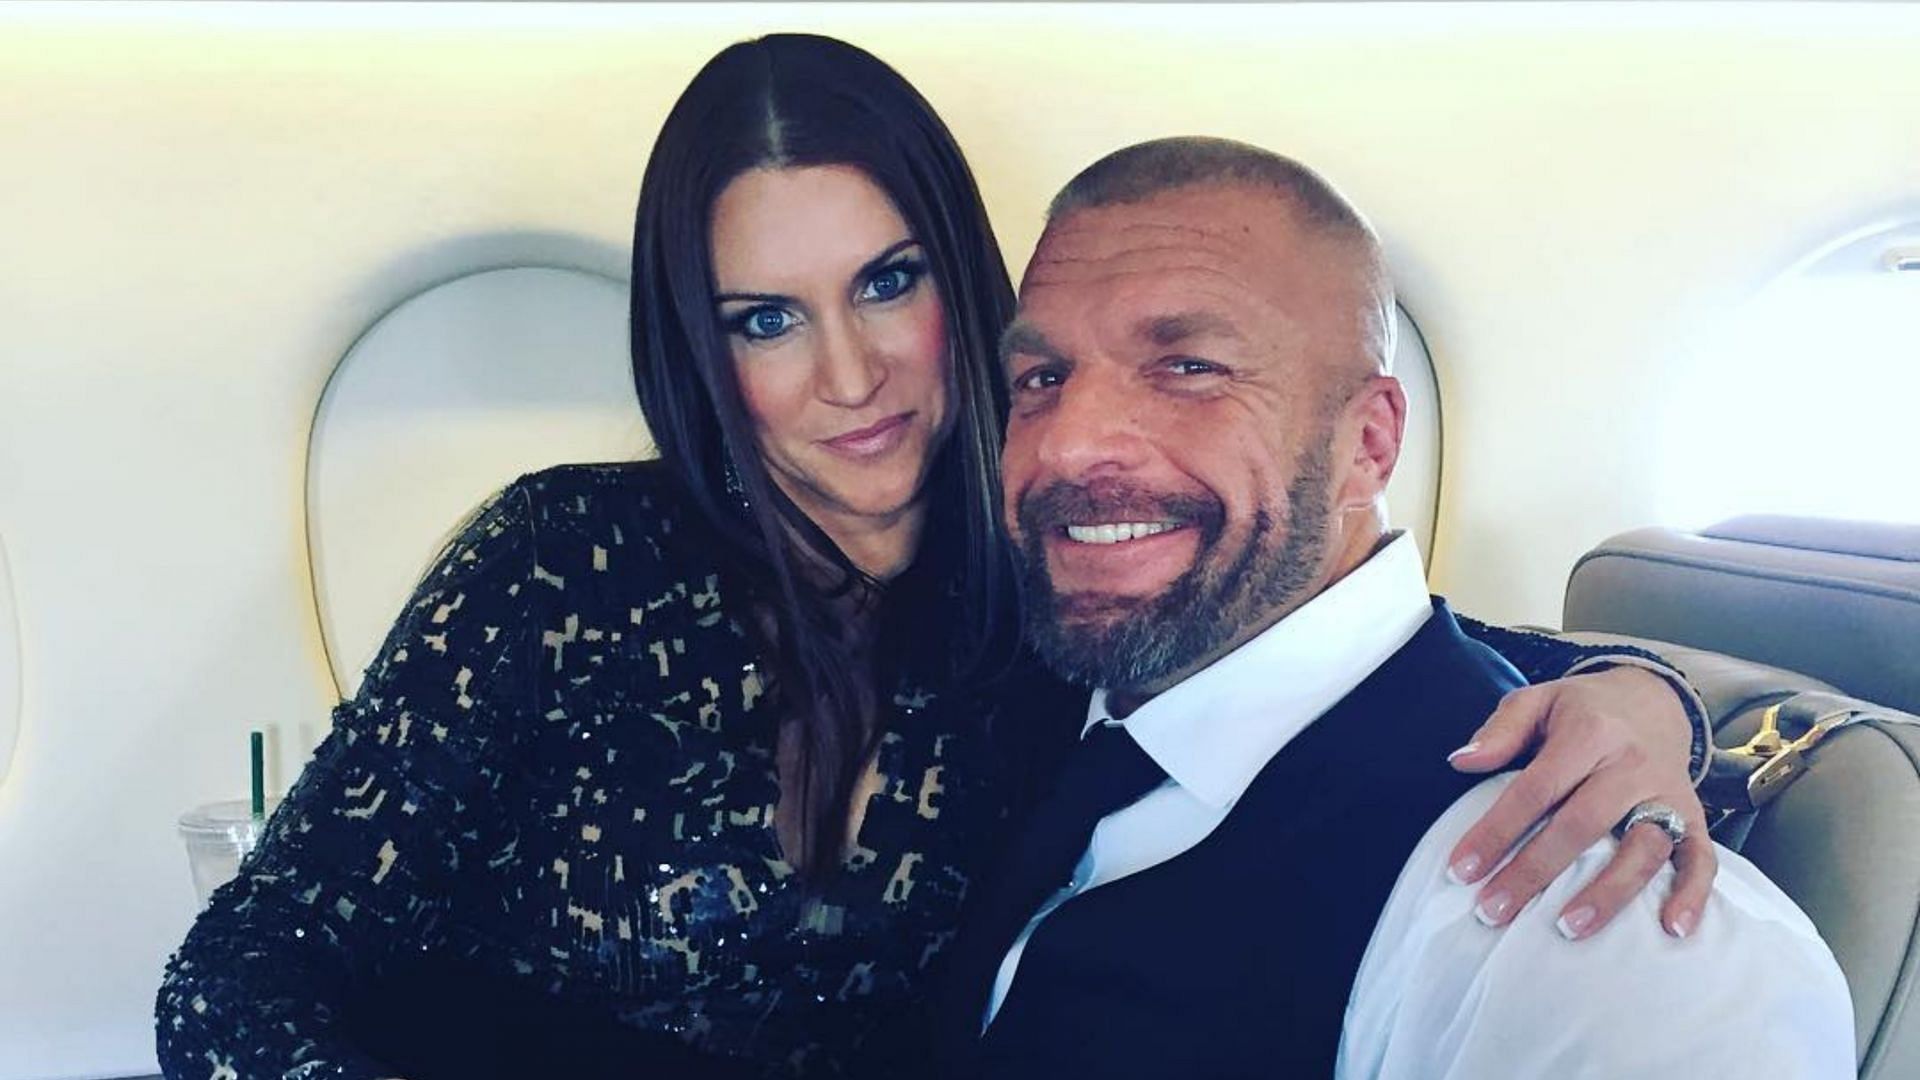 WWE Chief Content Officer Triple H with former Chairwoman Stephanie McMahon